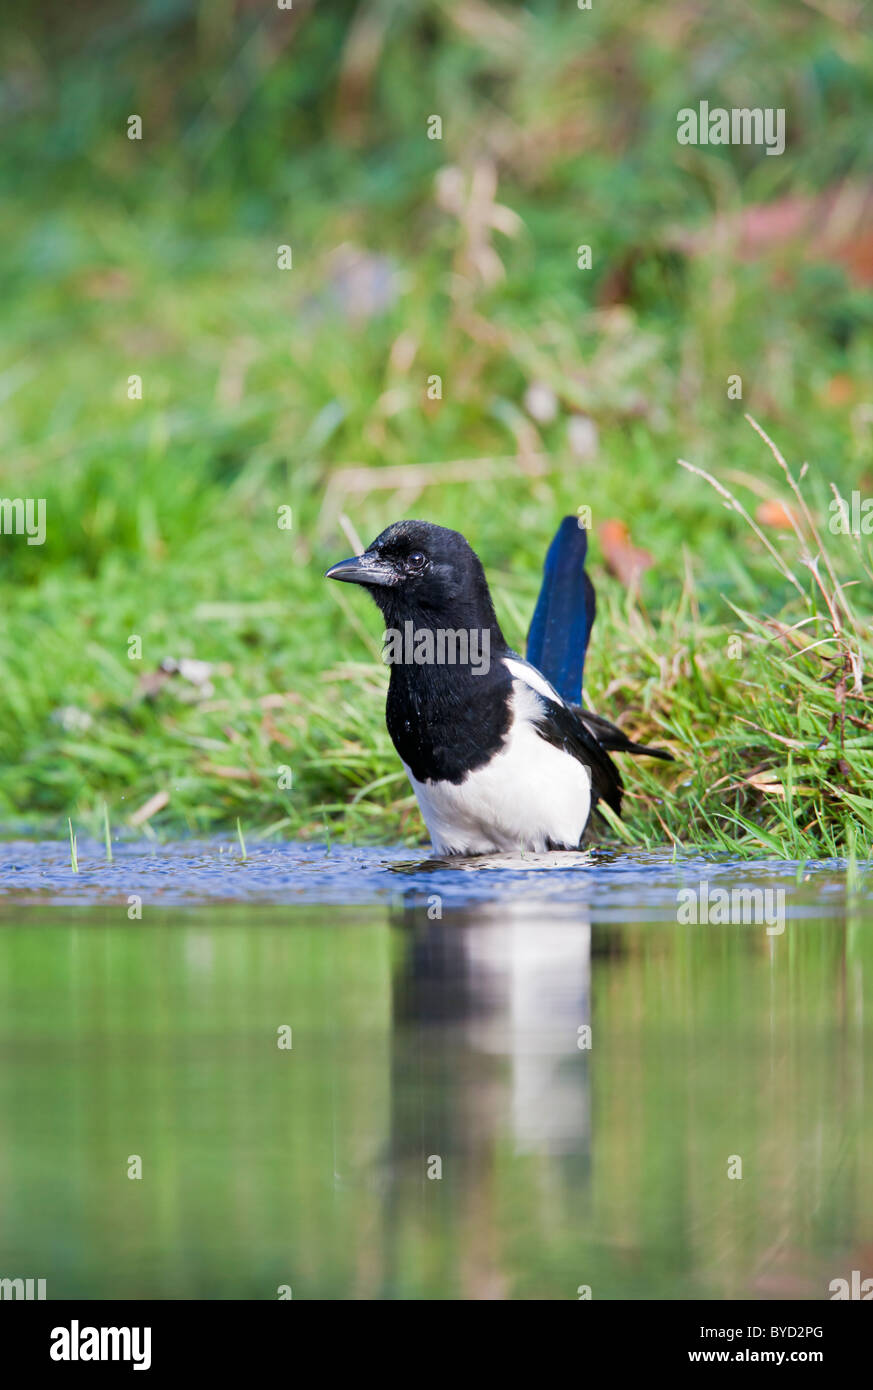 Magpie ( Pica pica ) bathing in pond Stock Photo